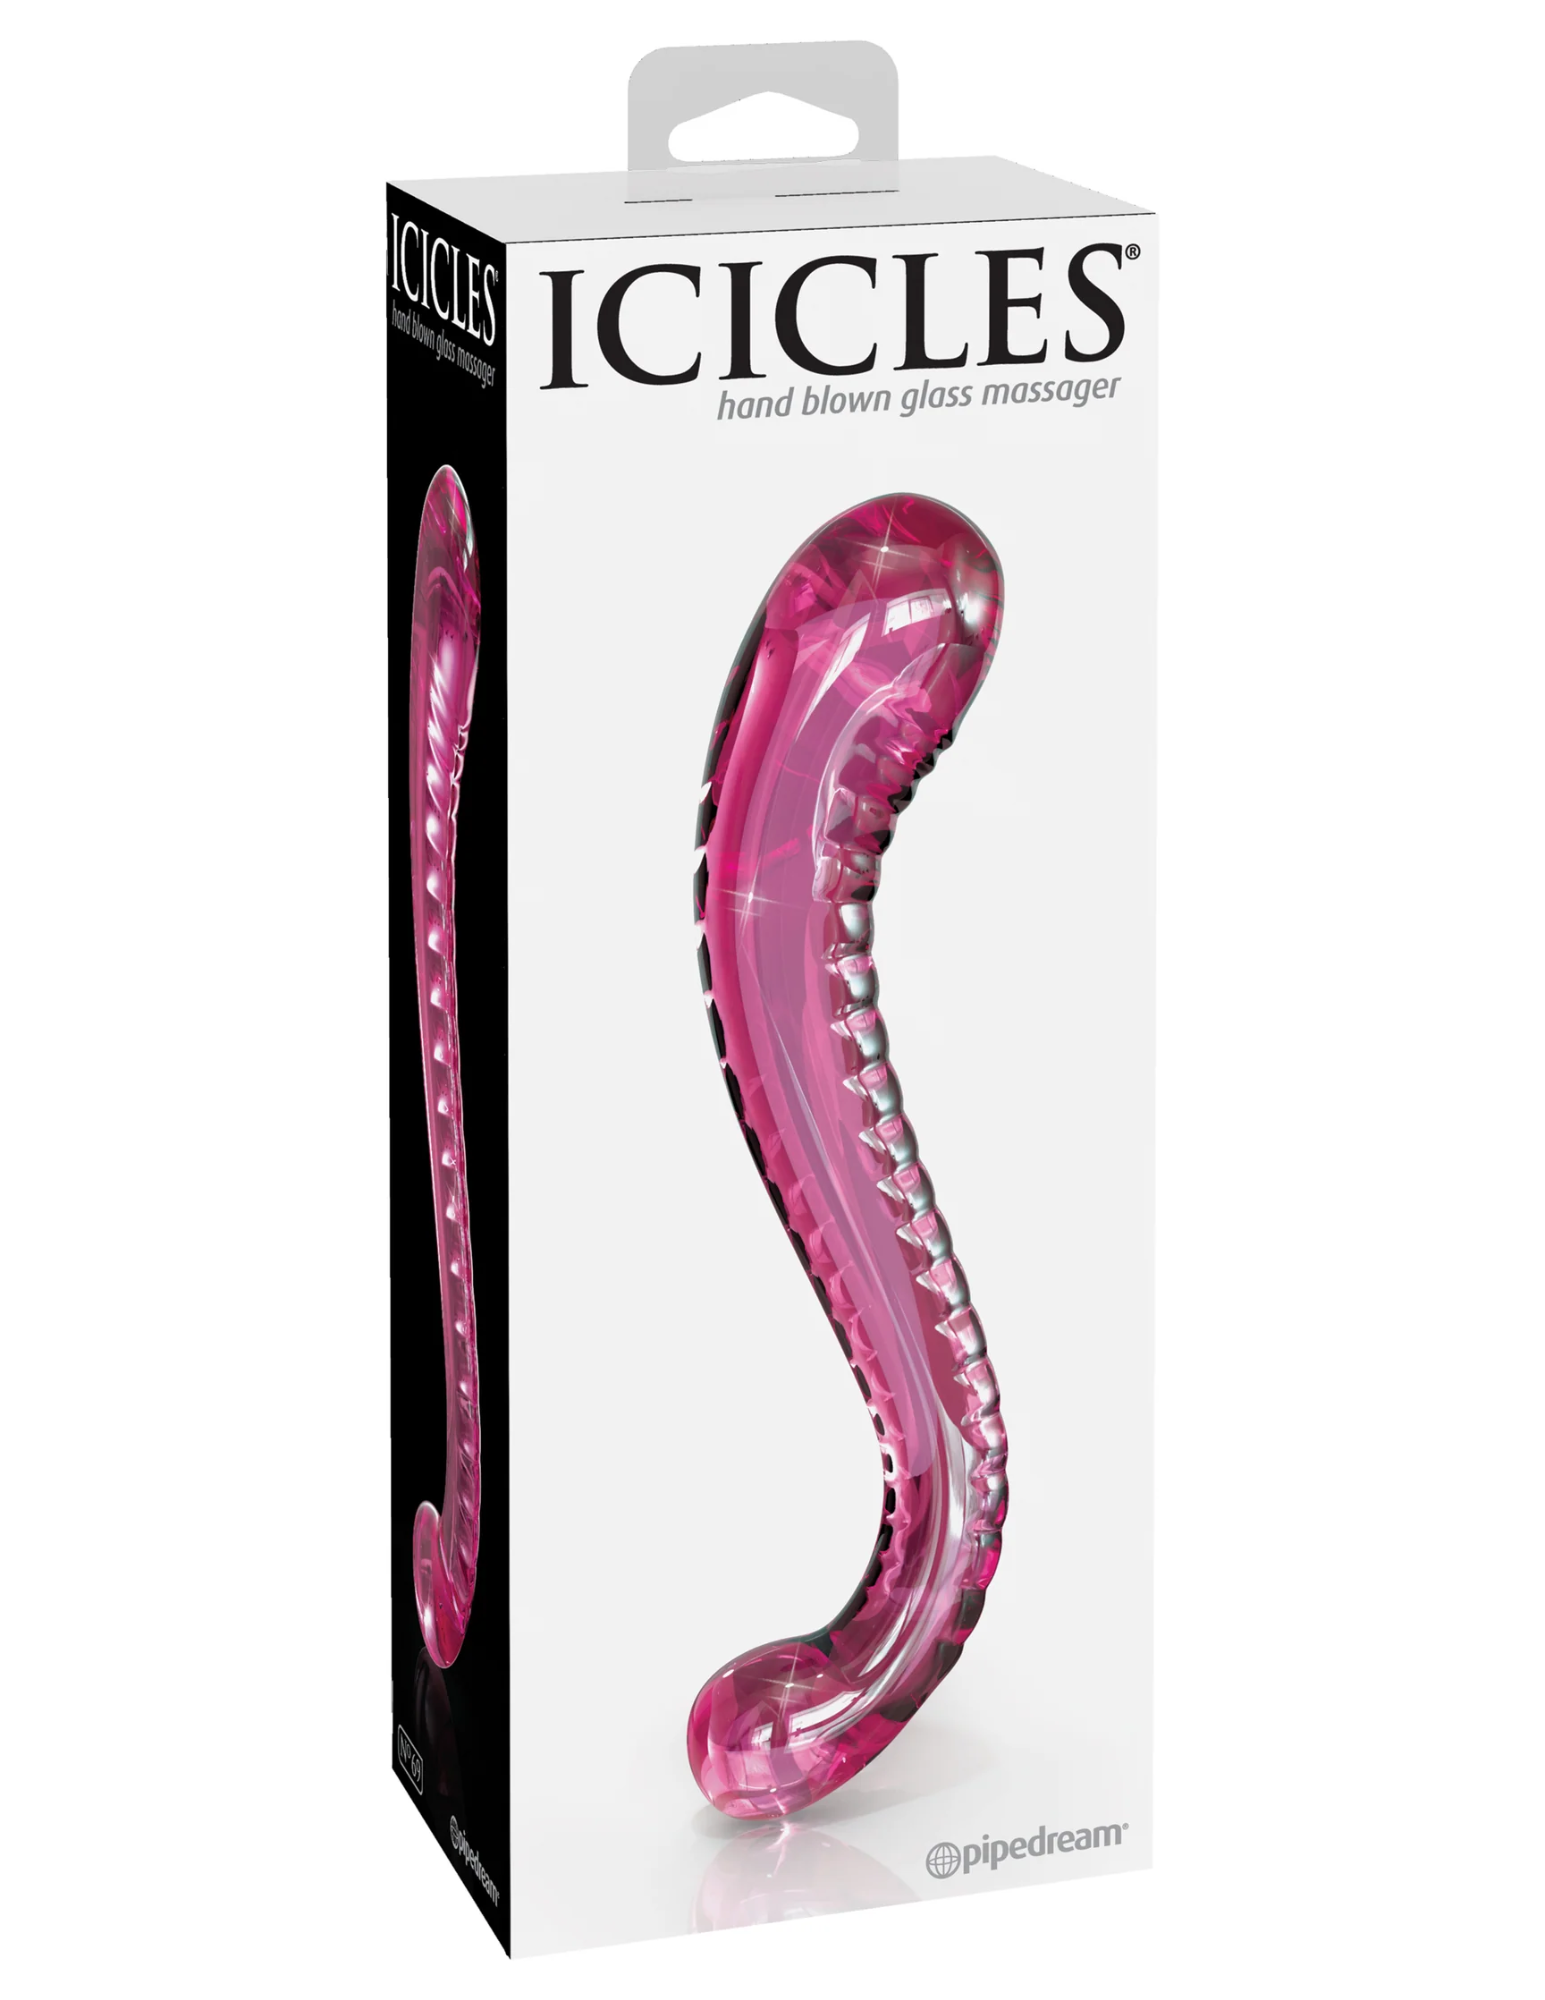 Photo of the front of the box for the No. 69 Textured G-Spot Glass Probe from Pipedreams (pink).